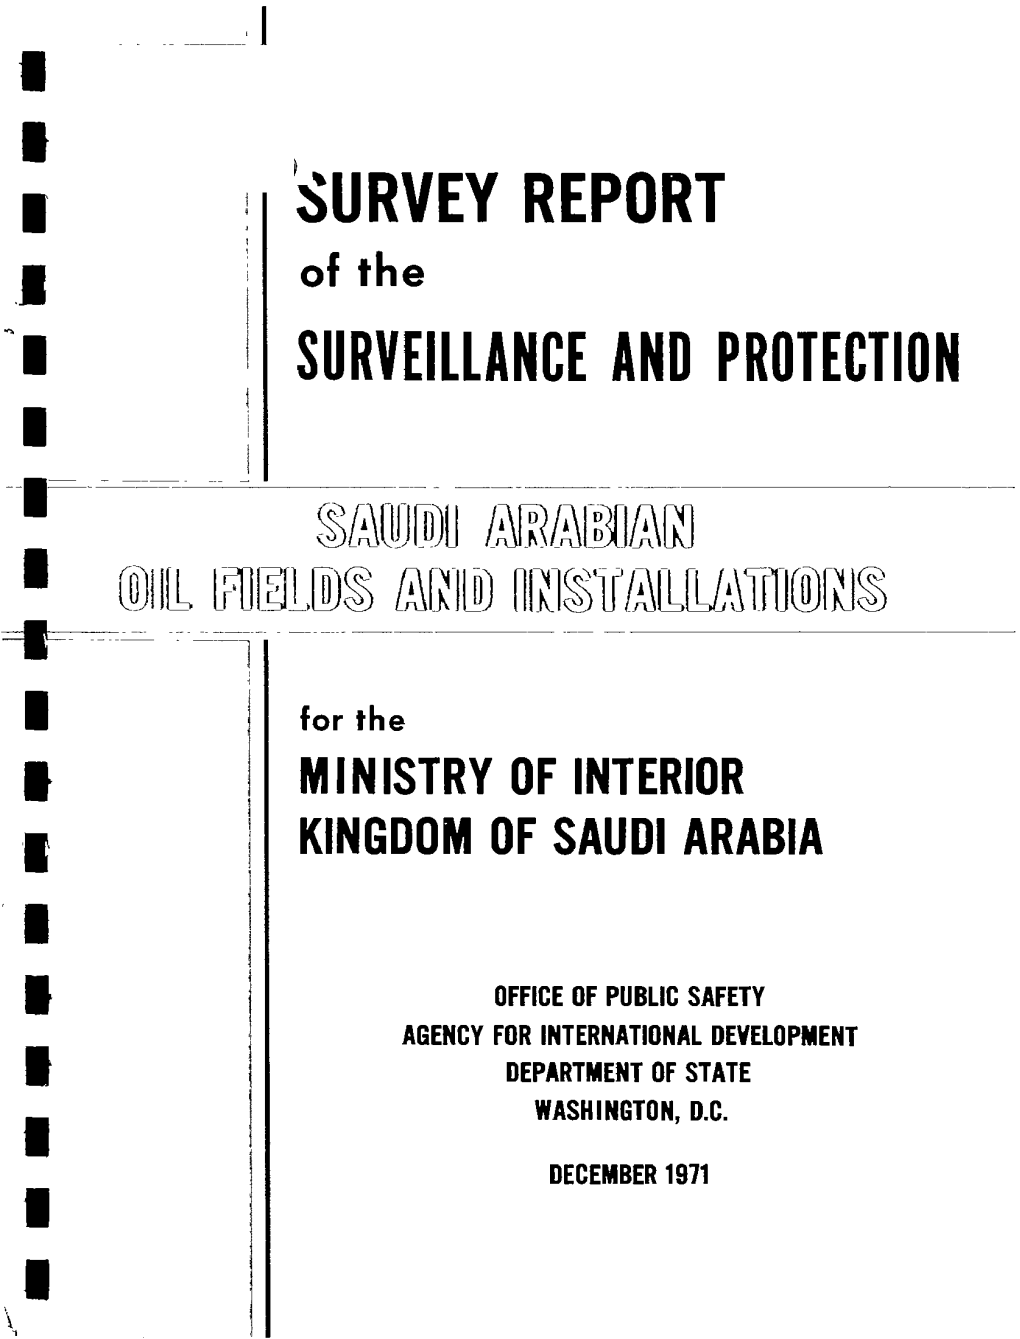 SURVEY REPORT of the SURVEILLANCE and PROTECTION